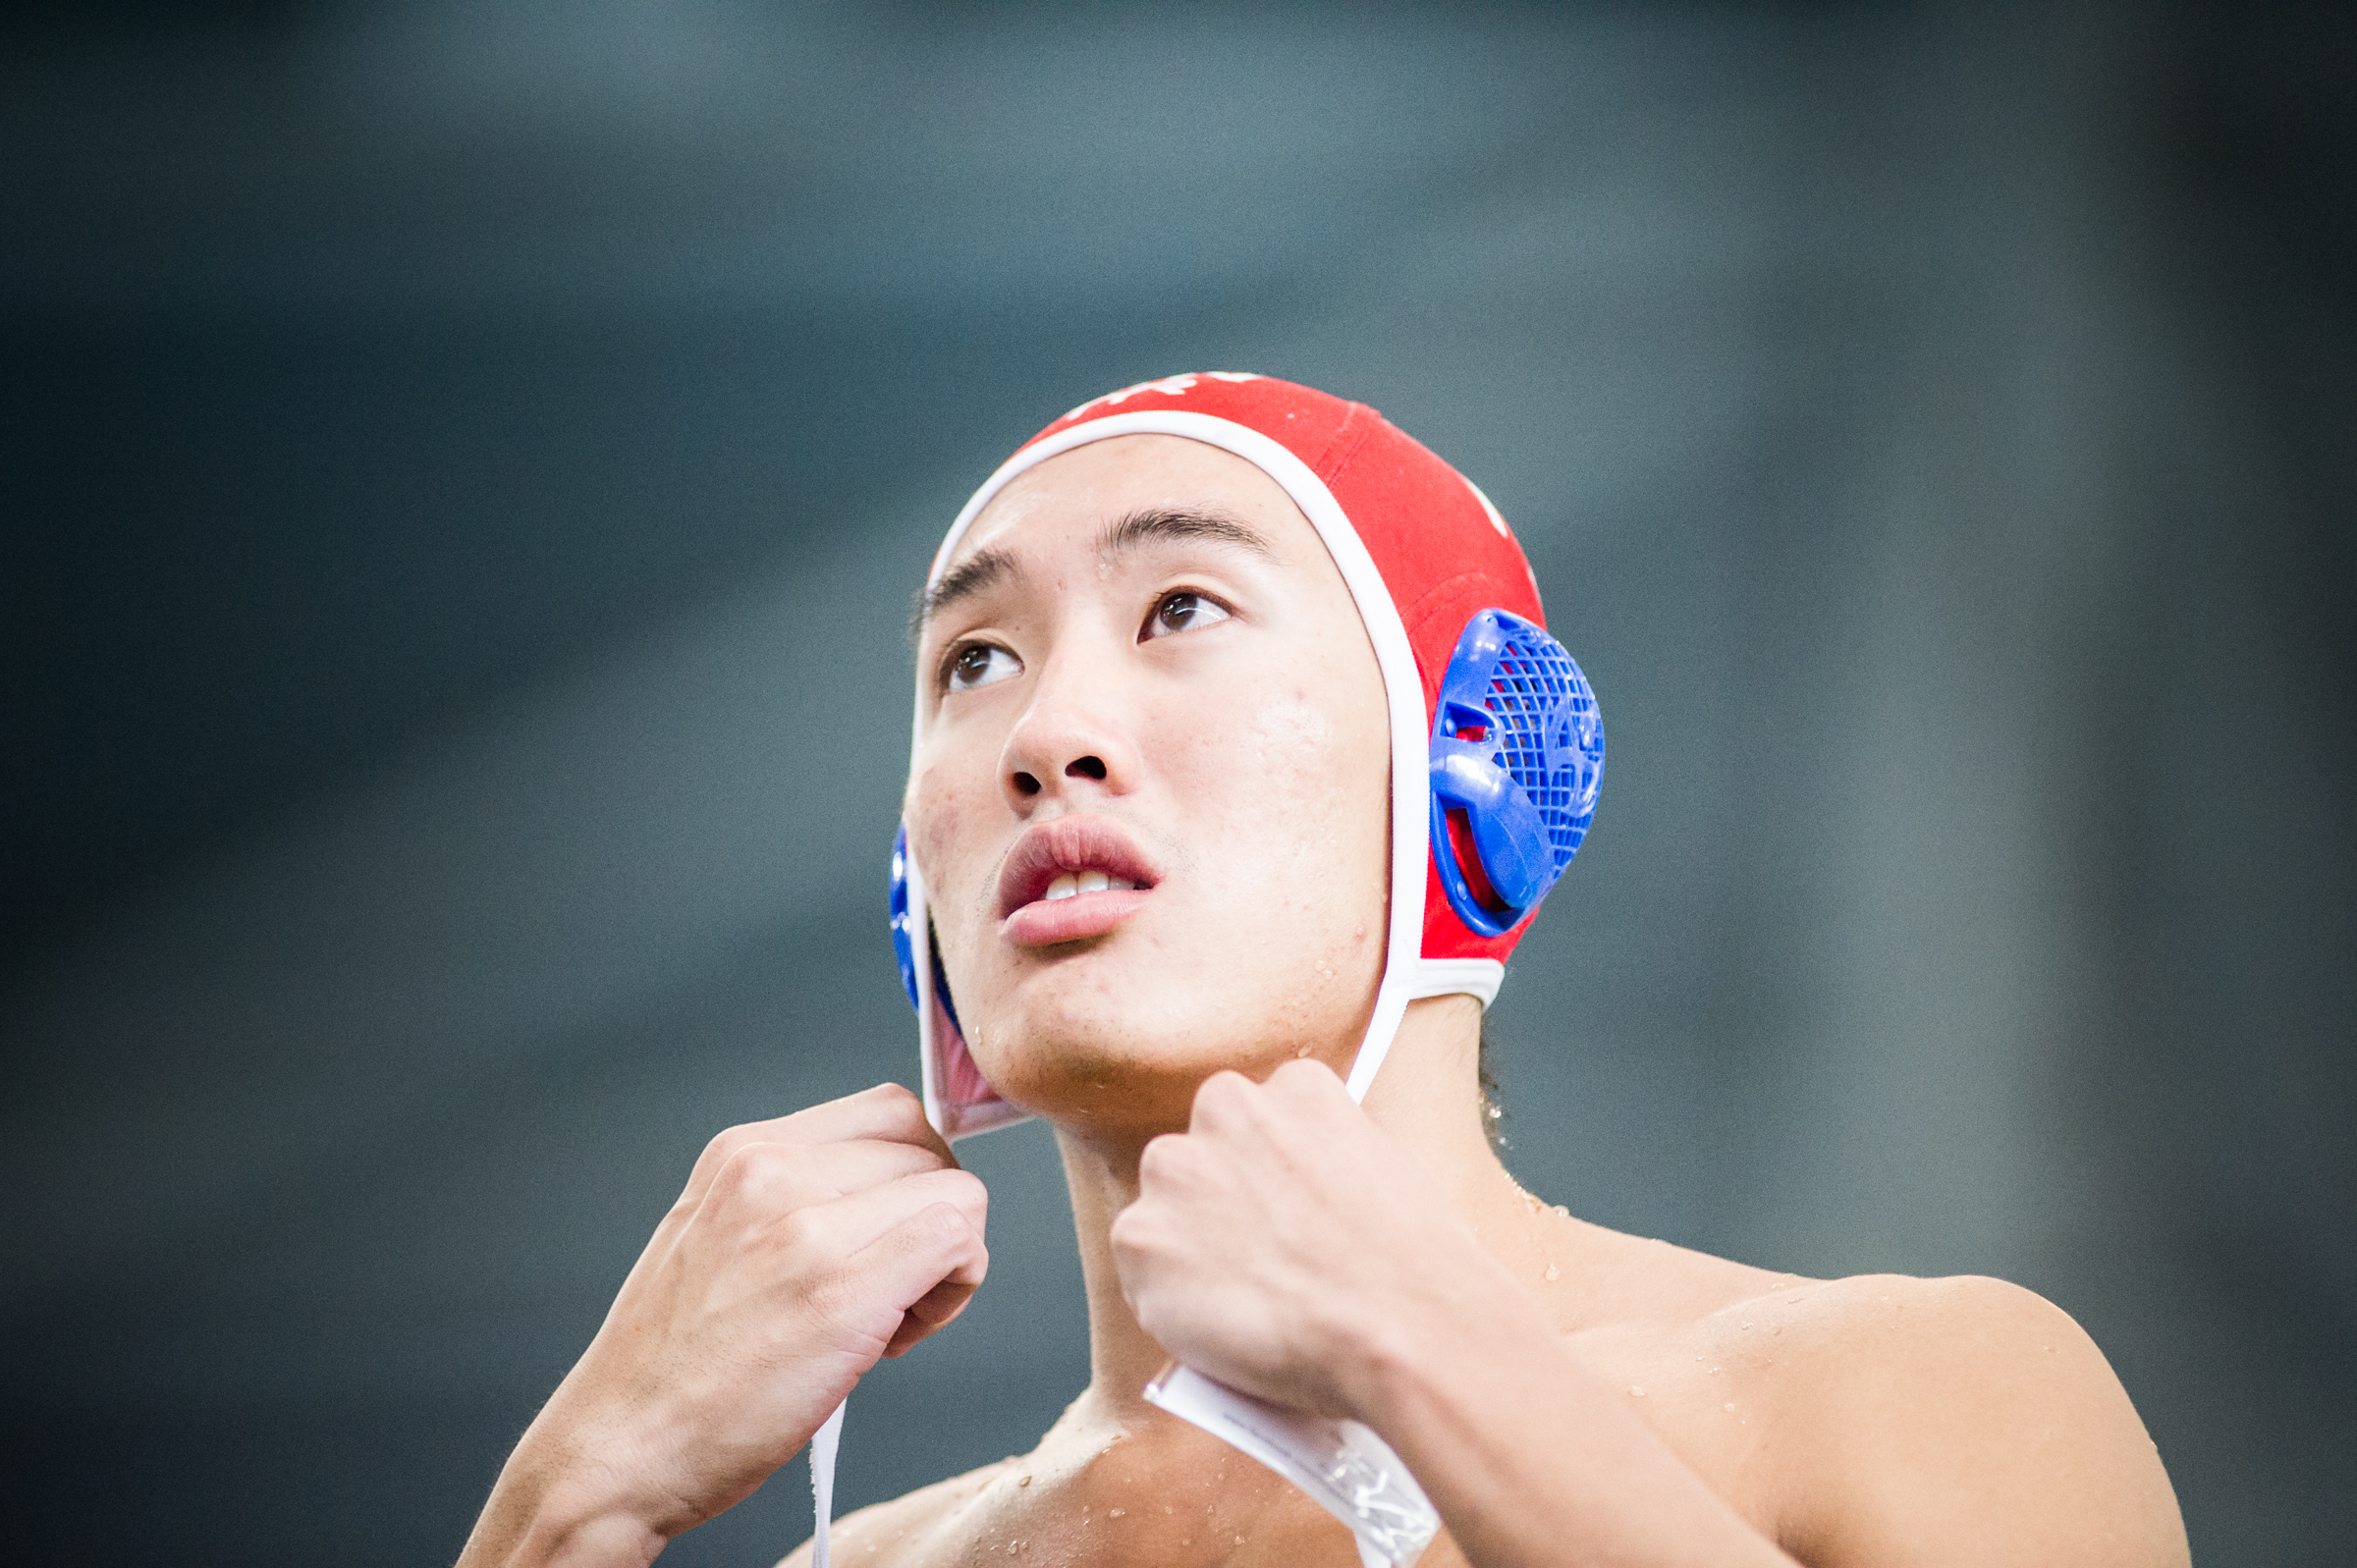 A Singaporean player puts on his cap before the water polo competition of the ASEAN University Games at the OCBC Aquatic Centre.